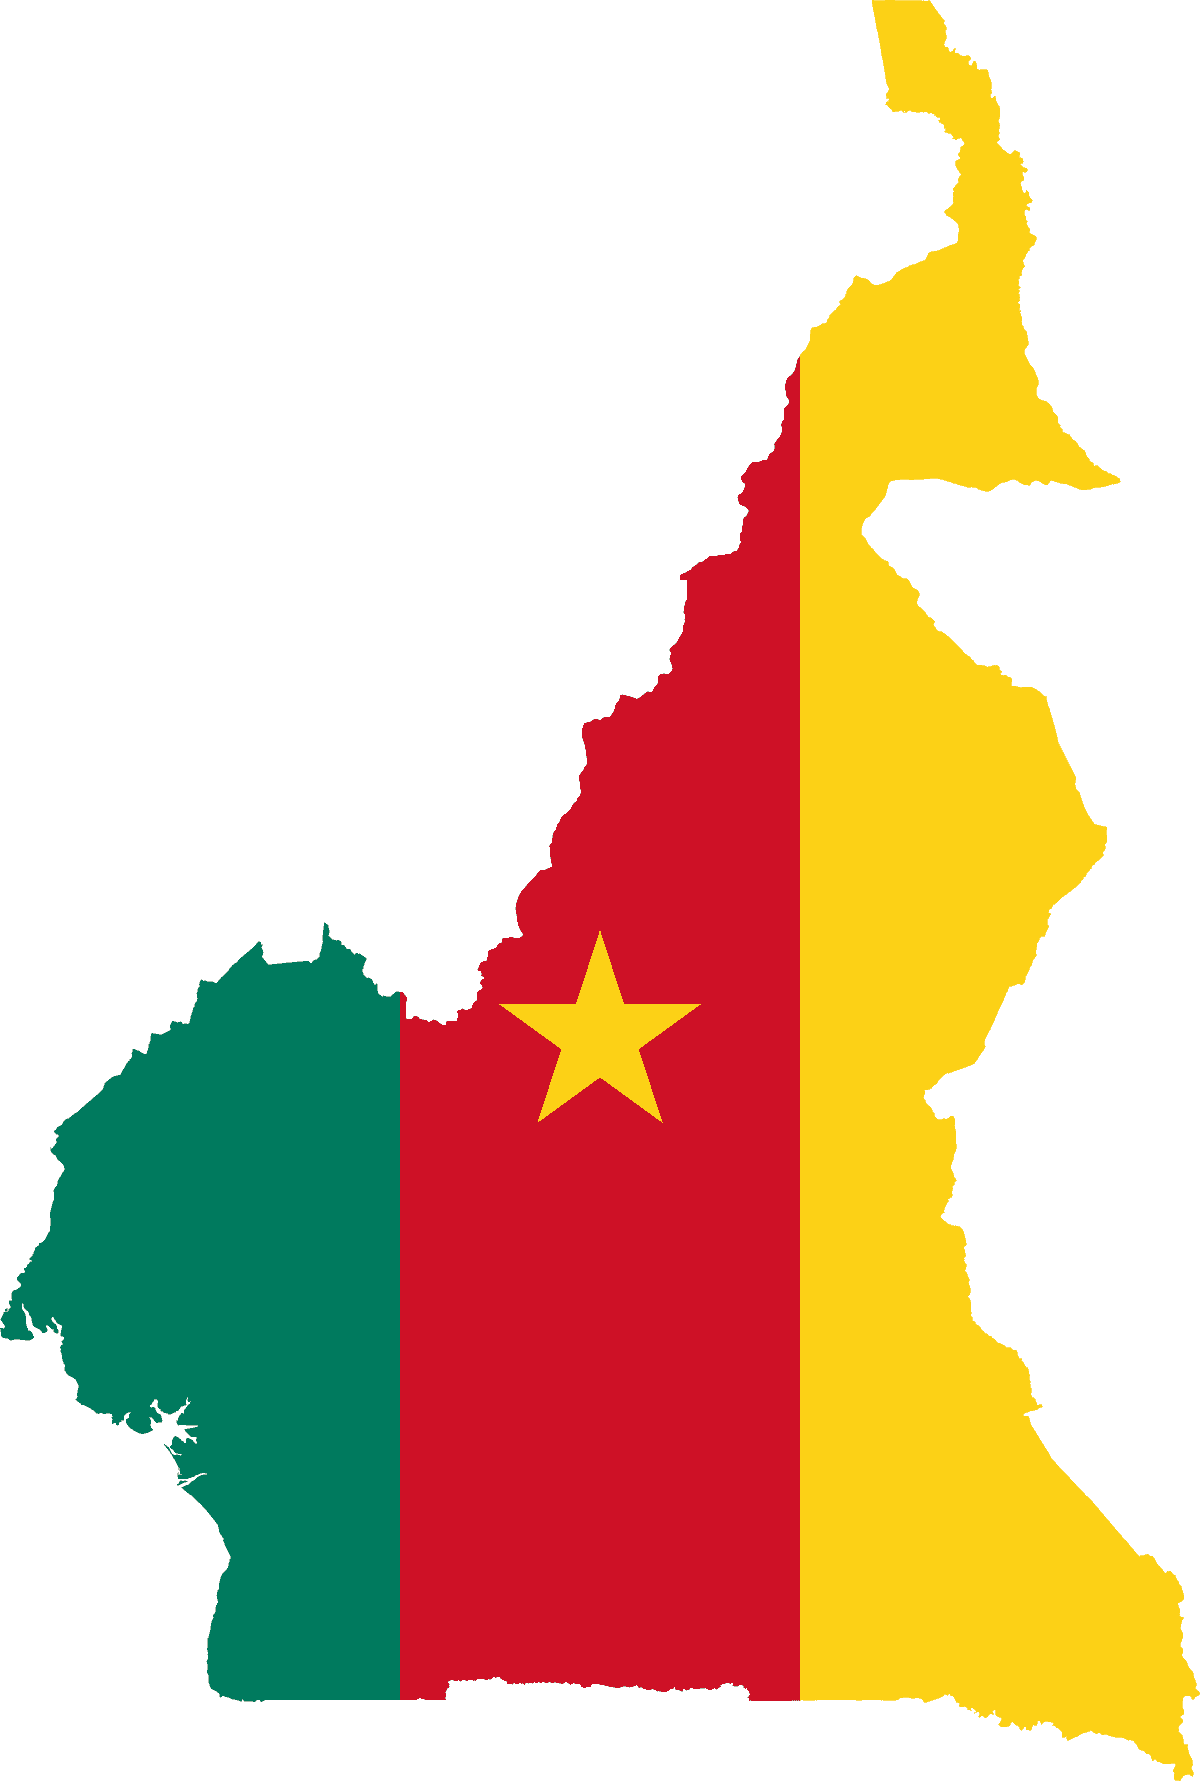 Flag map of Cameroon